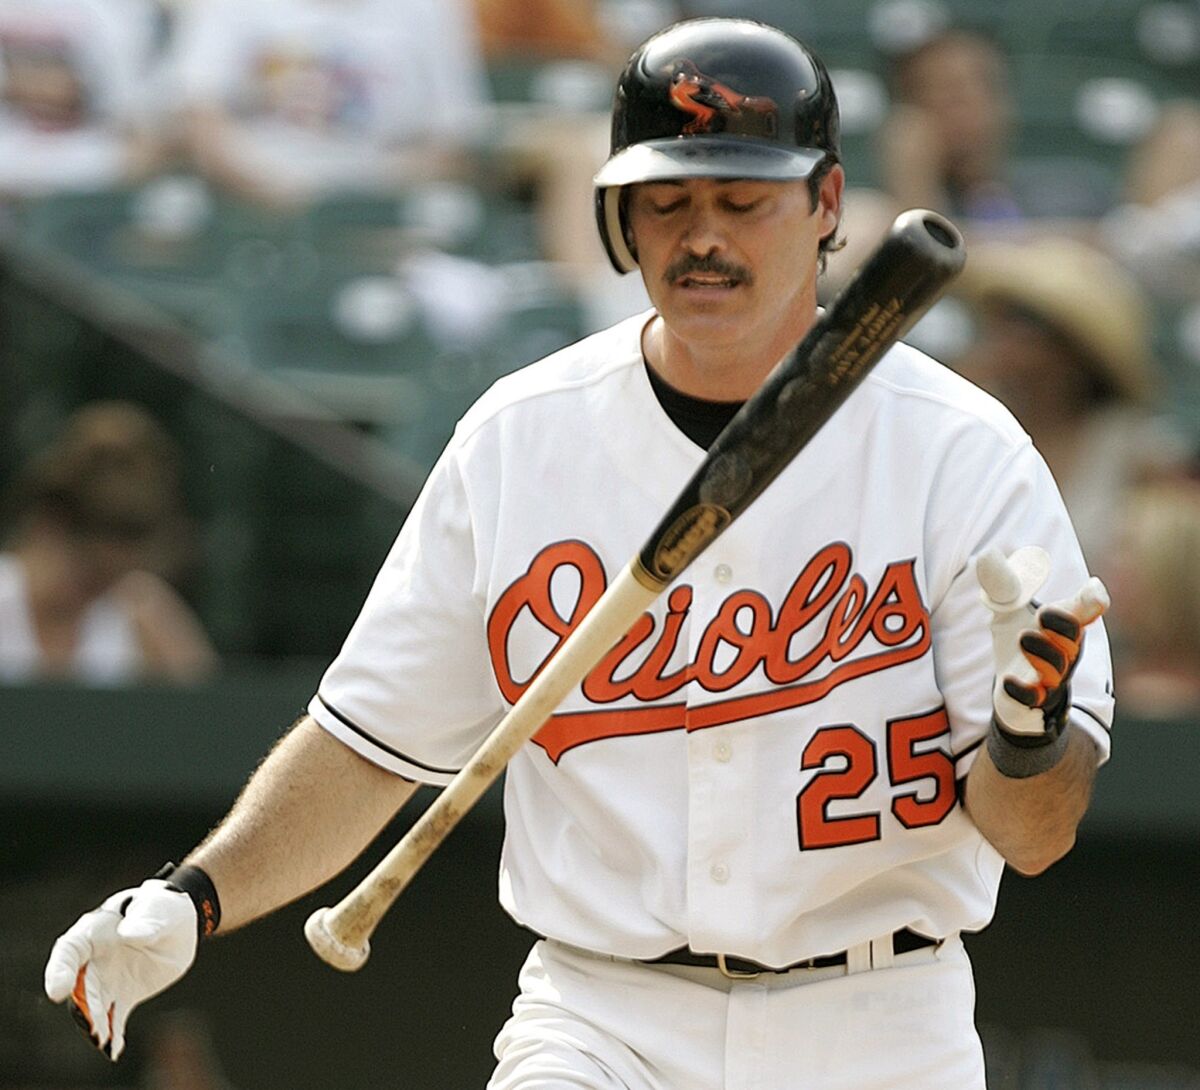 Rafael Palmeiro was named on just 8.8% of the 569 Hall of Fame ballots cast, despite being only the fourth player in Major League Baseball history with 500 or more home runs and 3,000 or more hits in his career.